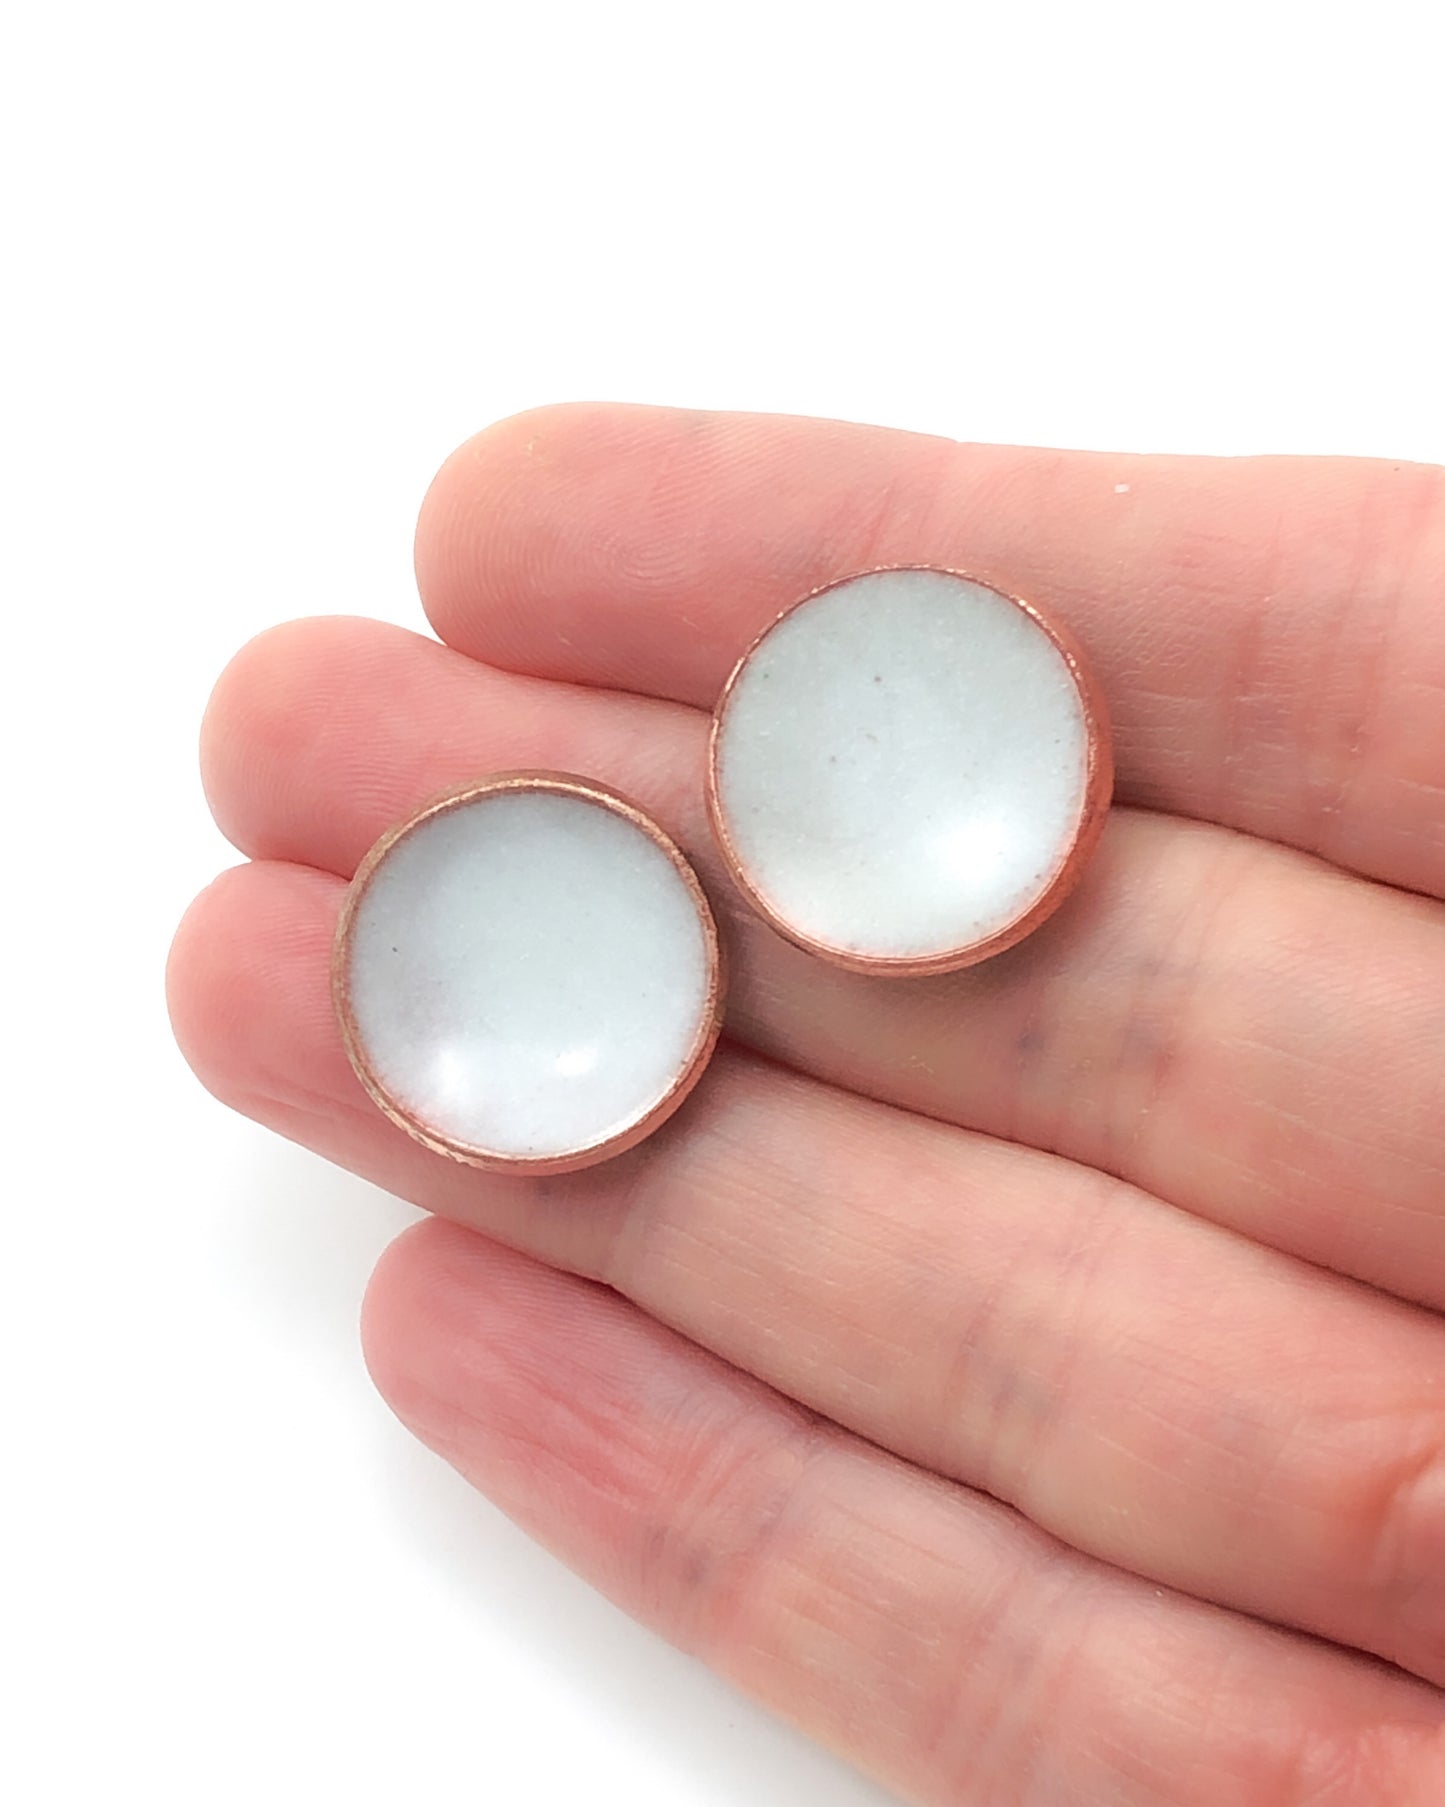 a pair of small white glass cabochons in a hand